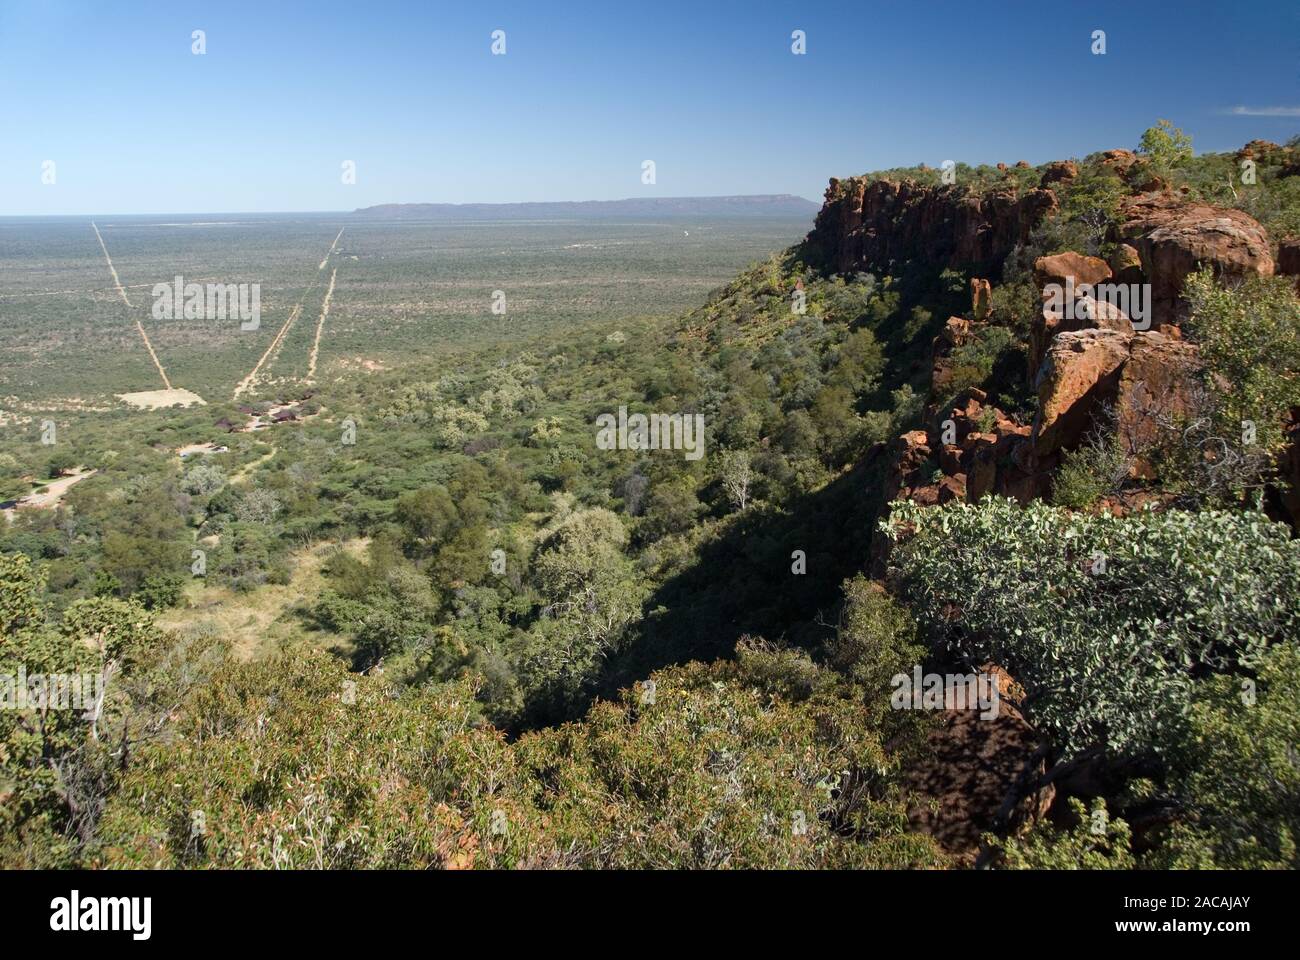 View from Waterberg Plateau Stock Photo